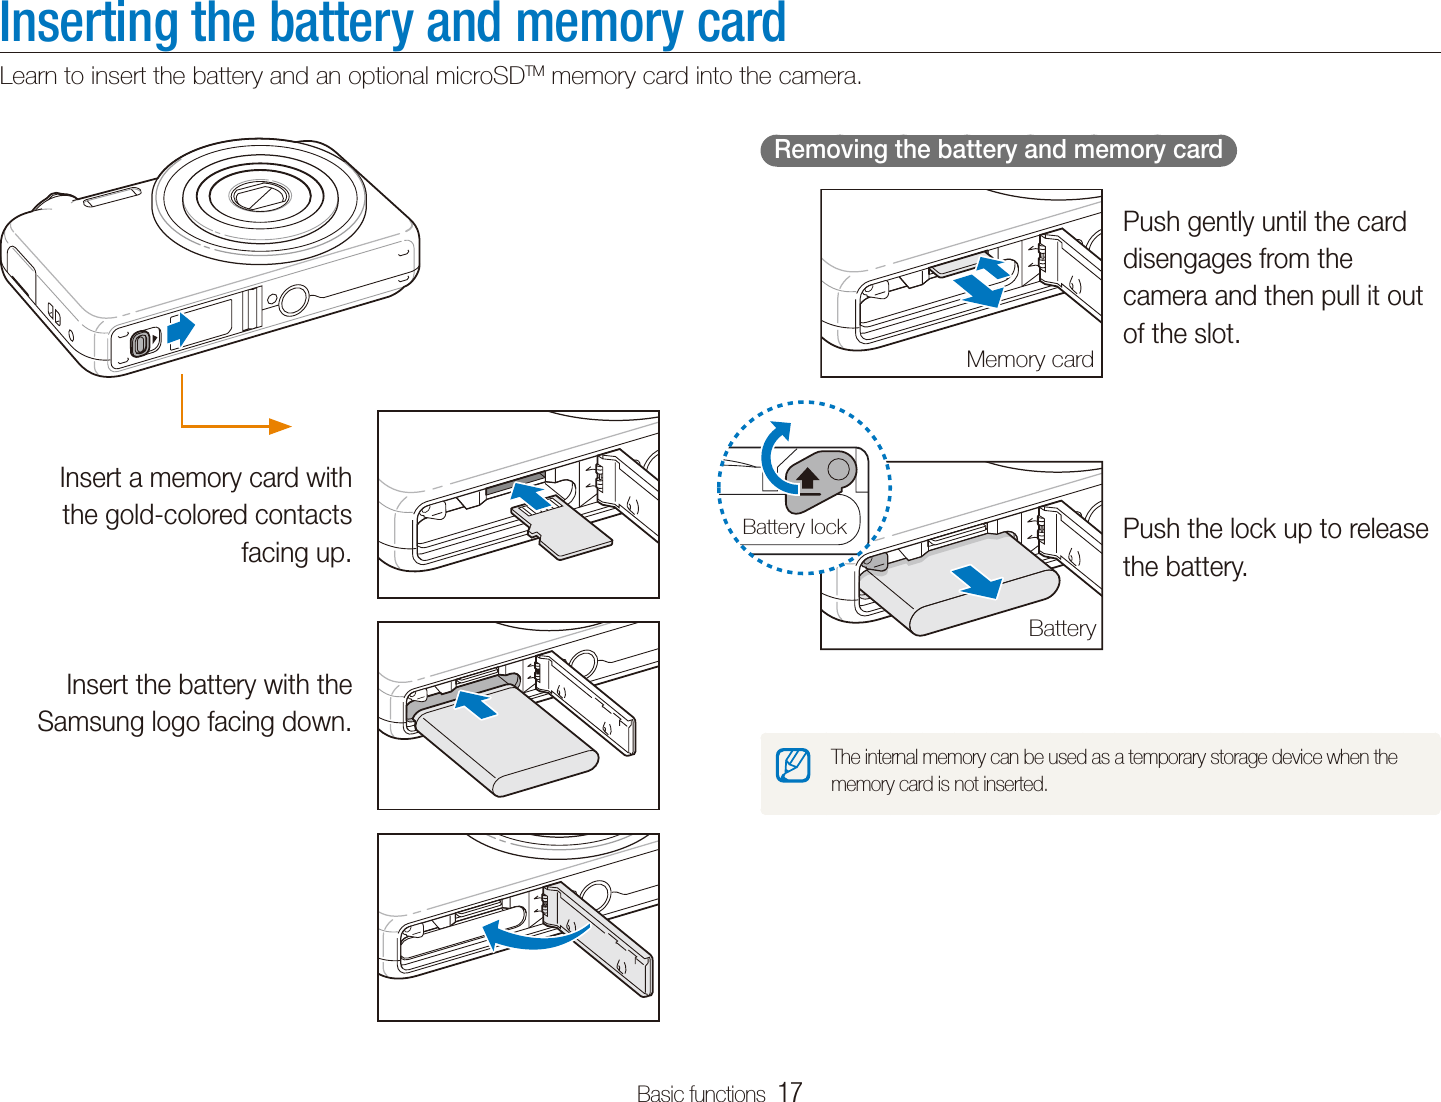 Basic functions  17Inserting the battery and memory cardLearn to insert the battery and an optional microSDTM memory card into the camera.  Removing the battery and memory card  Push gently until the card disengages from the camera and then pull it out of the slot.Push the lock up to release the battery.The internal memory can be used as a temporary storage device when the memory card is not inserted.Memory cardBatteryBattery lockInsert a memory card with the gold-colored contacts facing up.Insert the battery with the Samsung logo facing down.